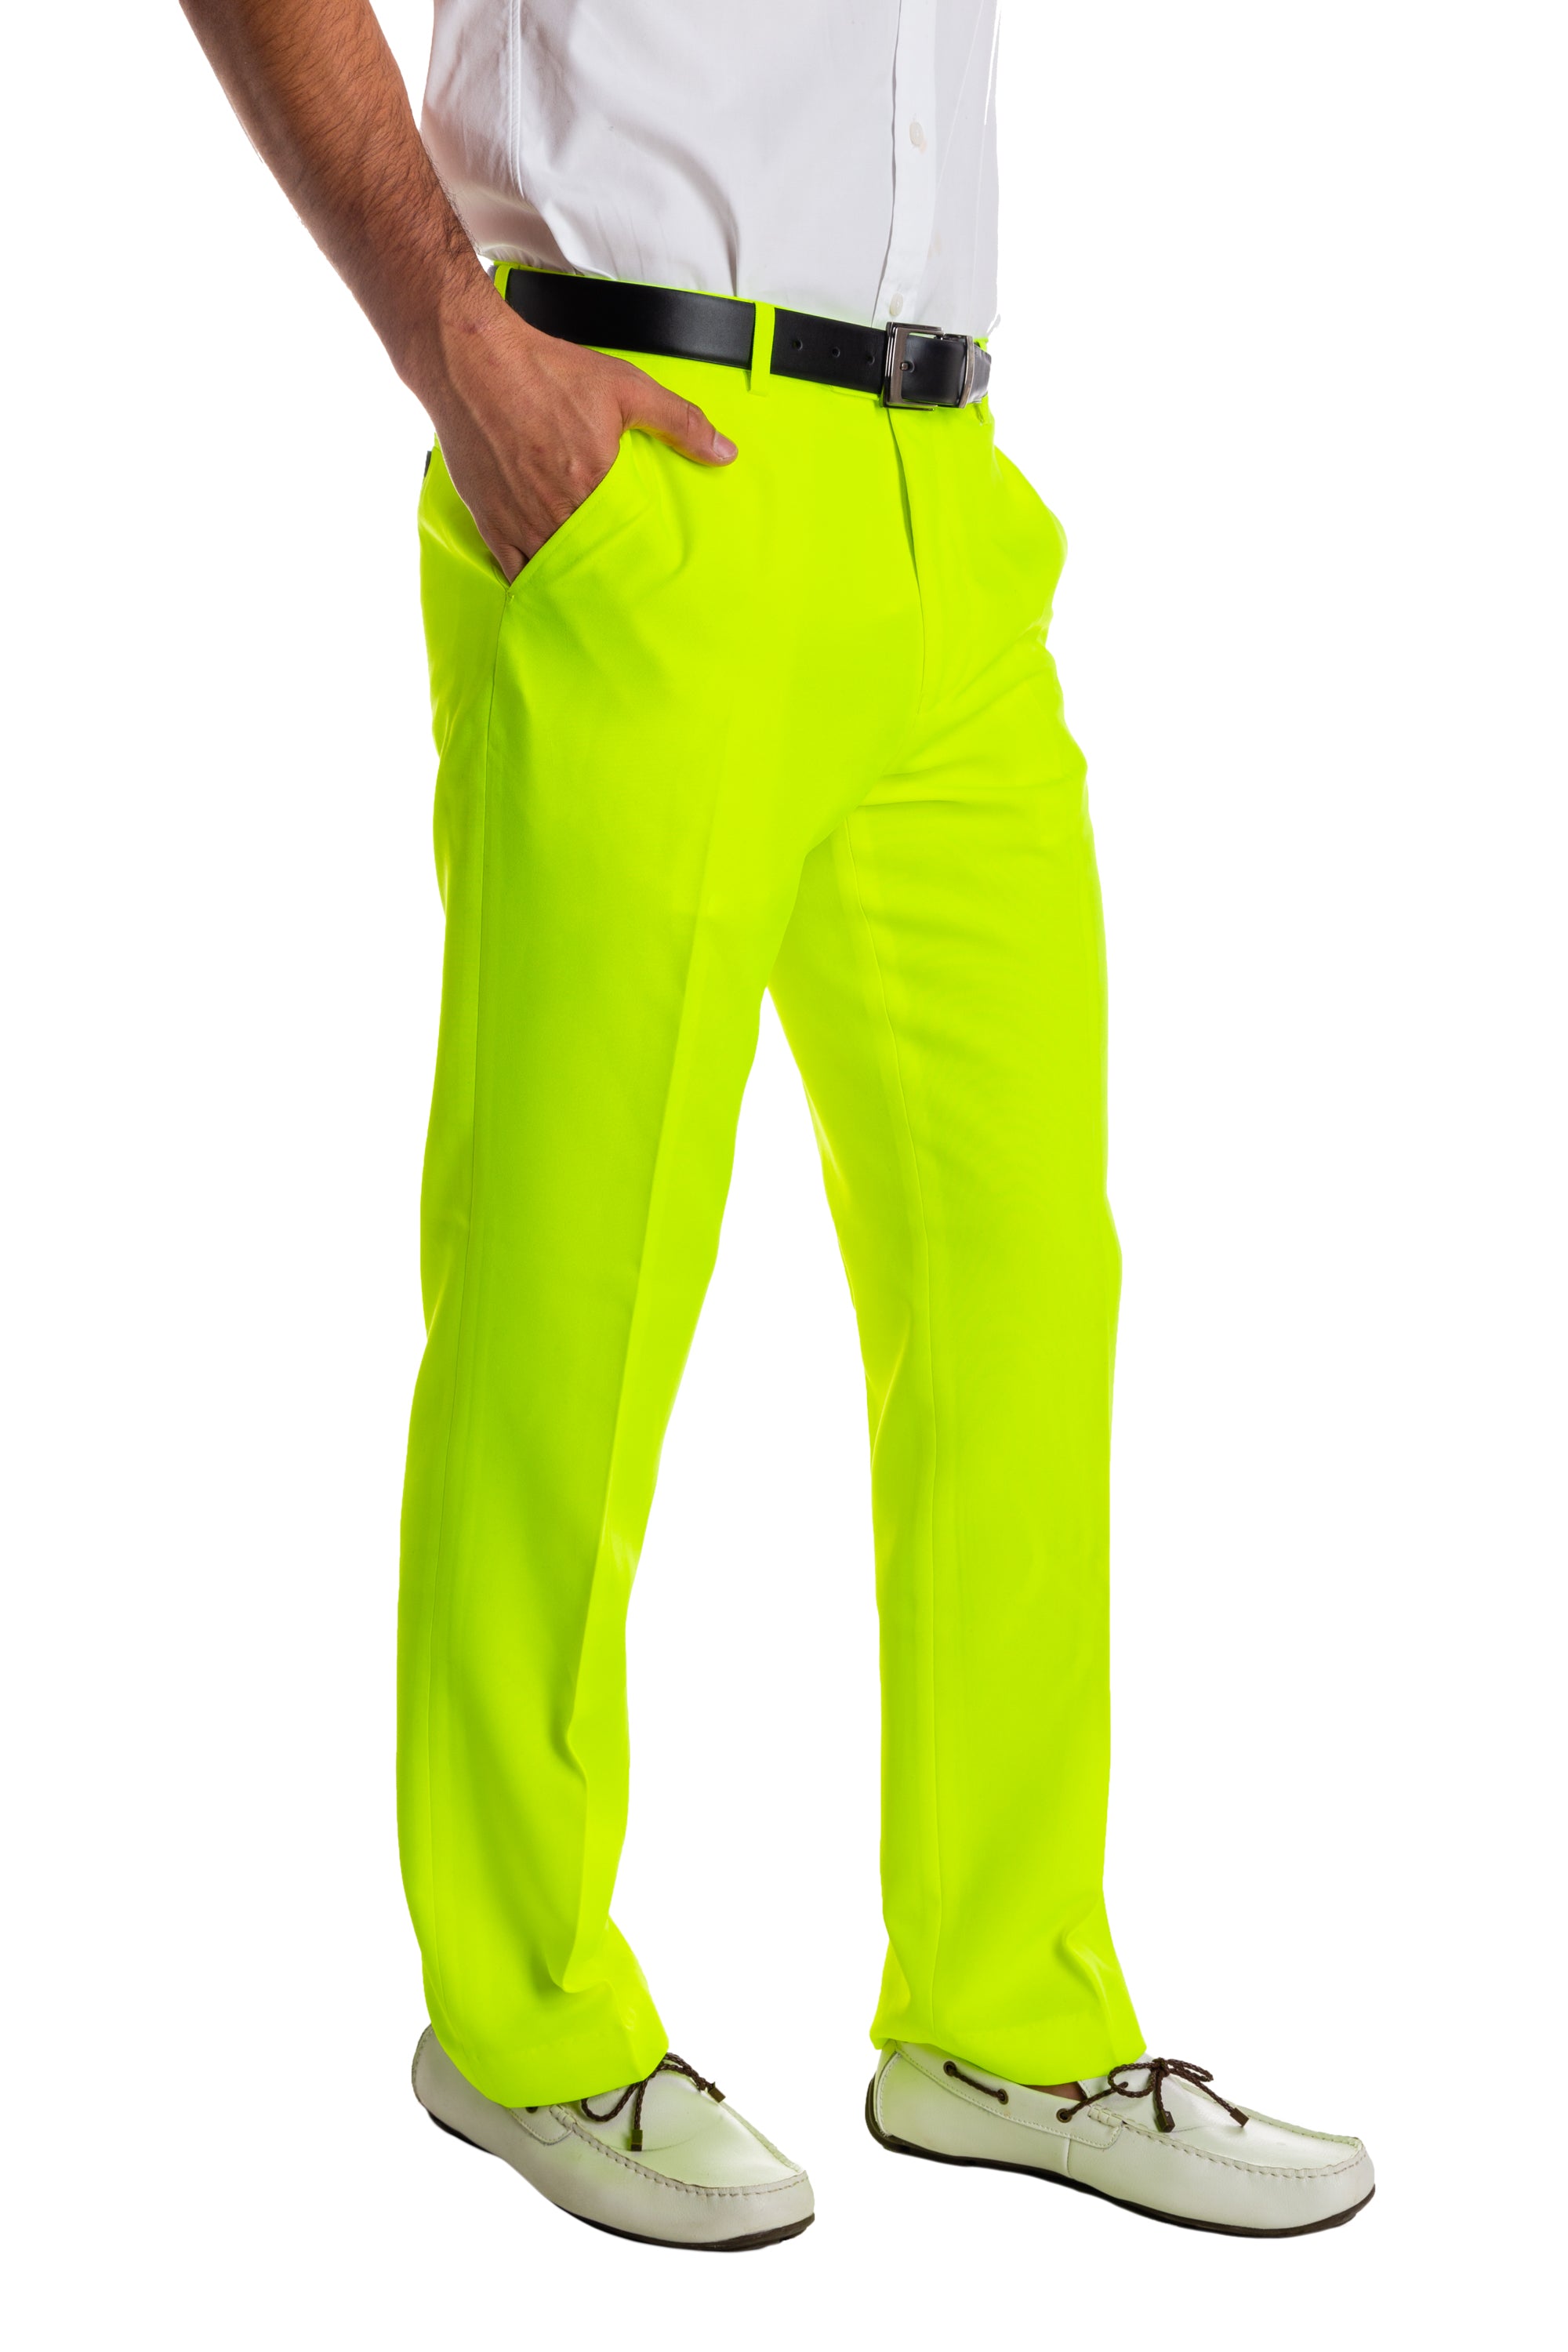 Neon Yellow Pants | The Candy Flip